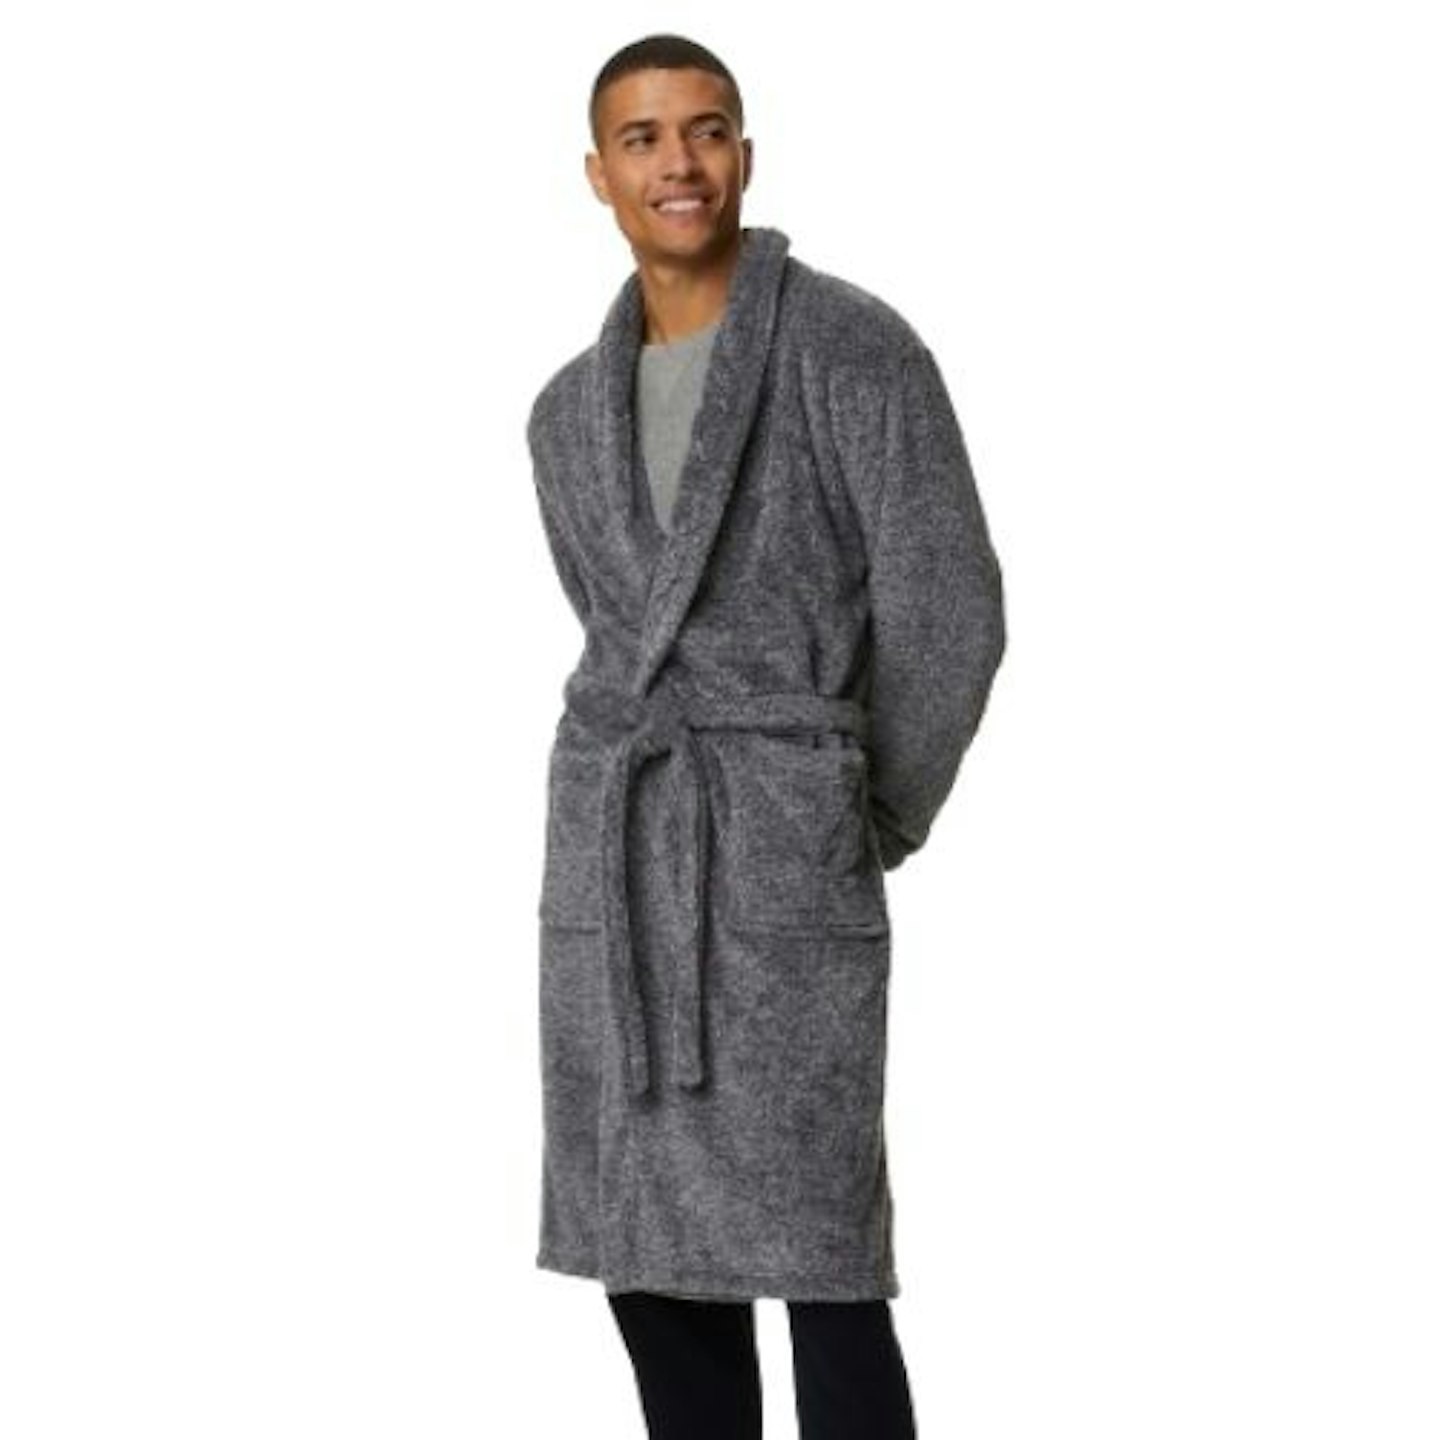 M&S Fleece Supersoft Dressing Gown